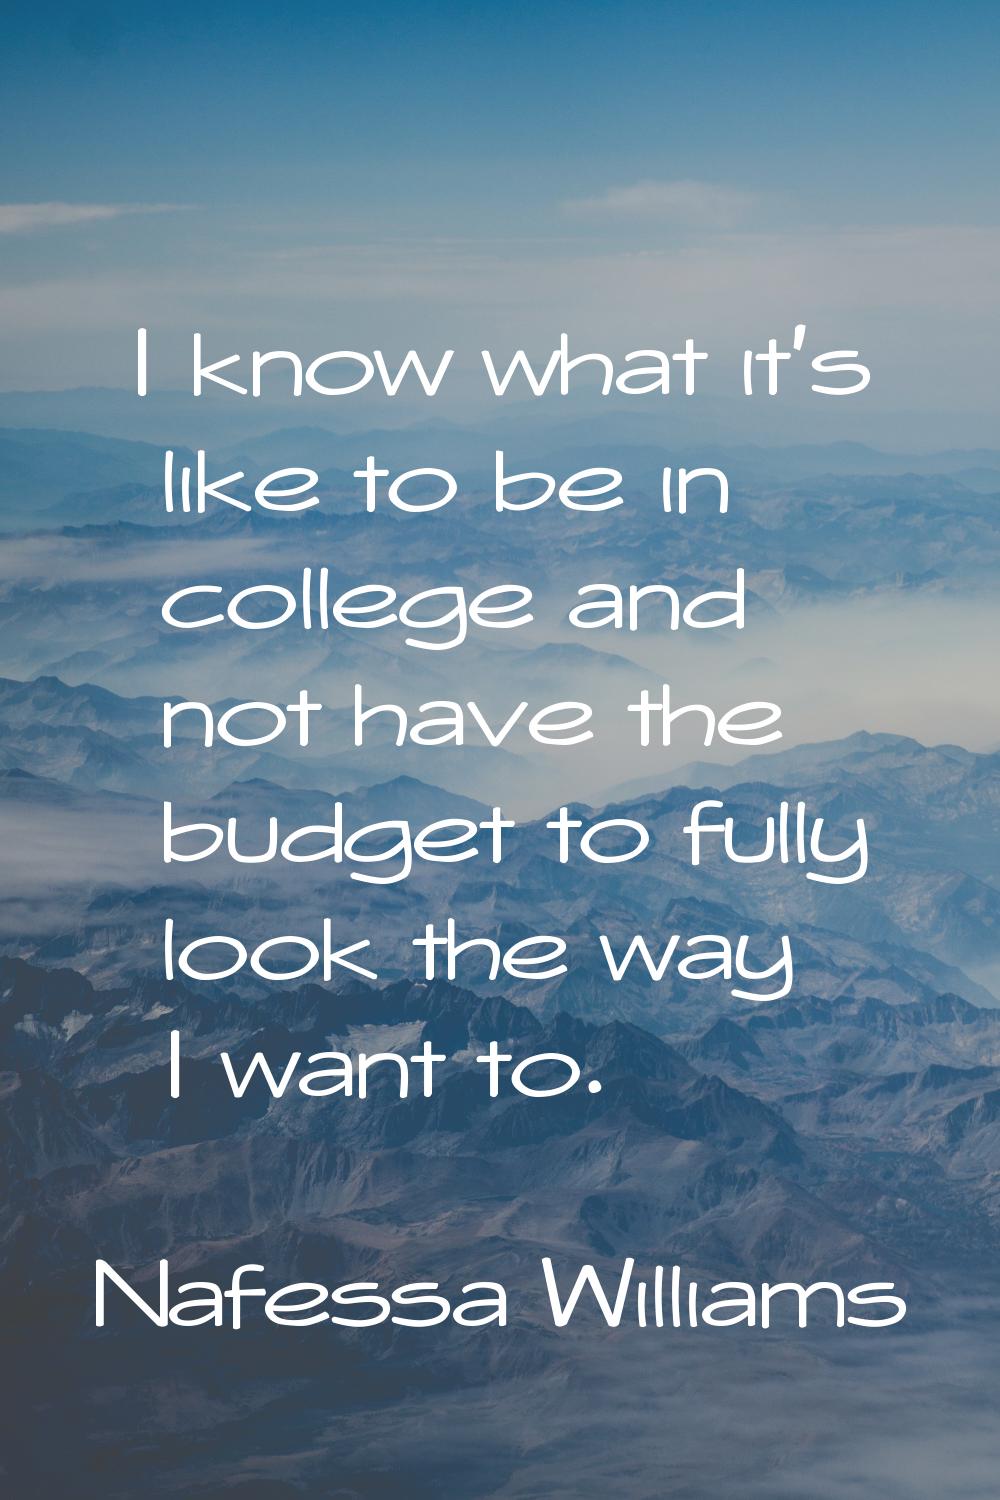 I know what it's like to be in college and not have the budget to fully look the way I want to.